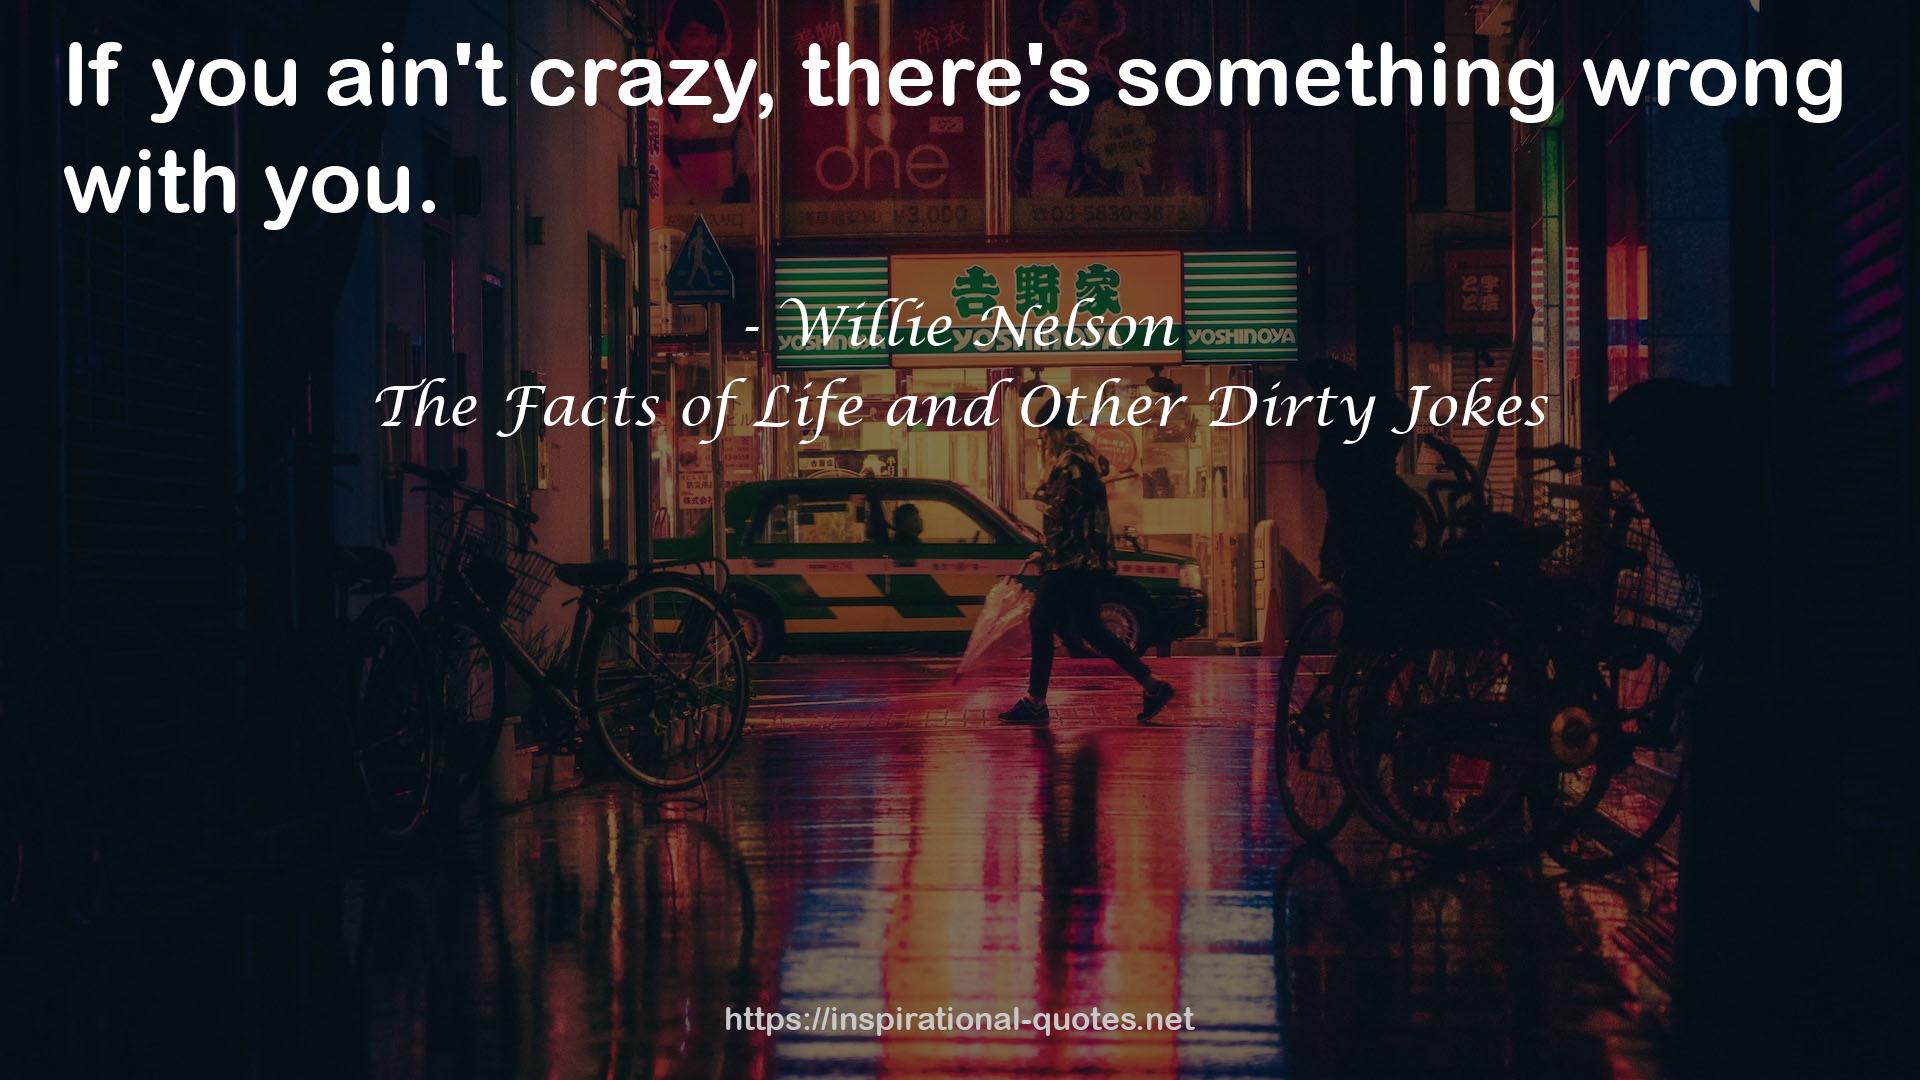 The Facts of Life and Other Dirty Jokes QUOTES